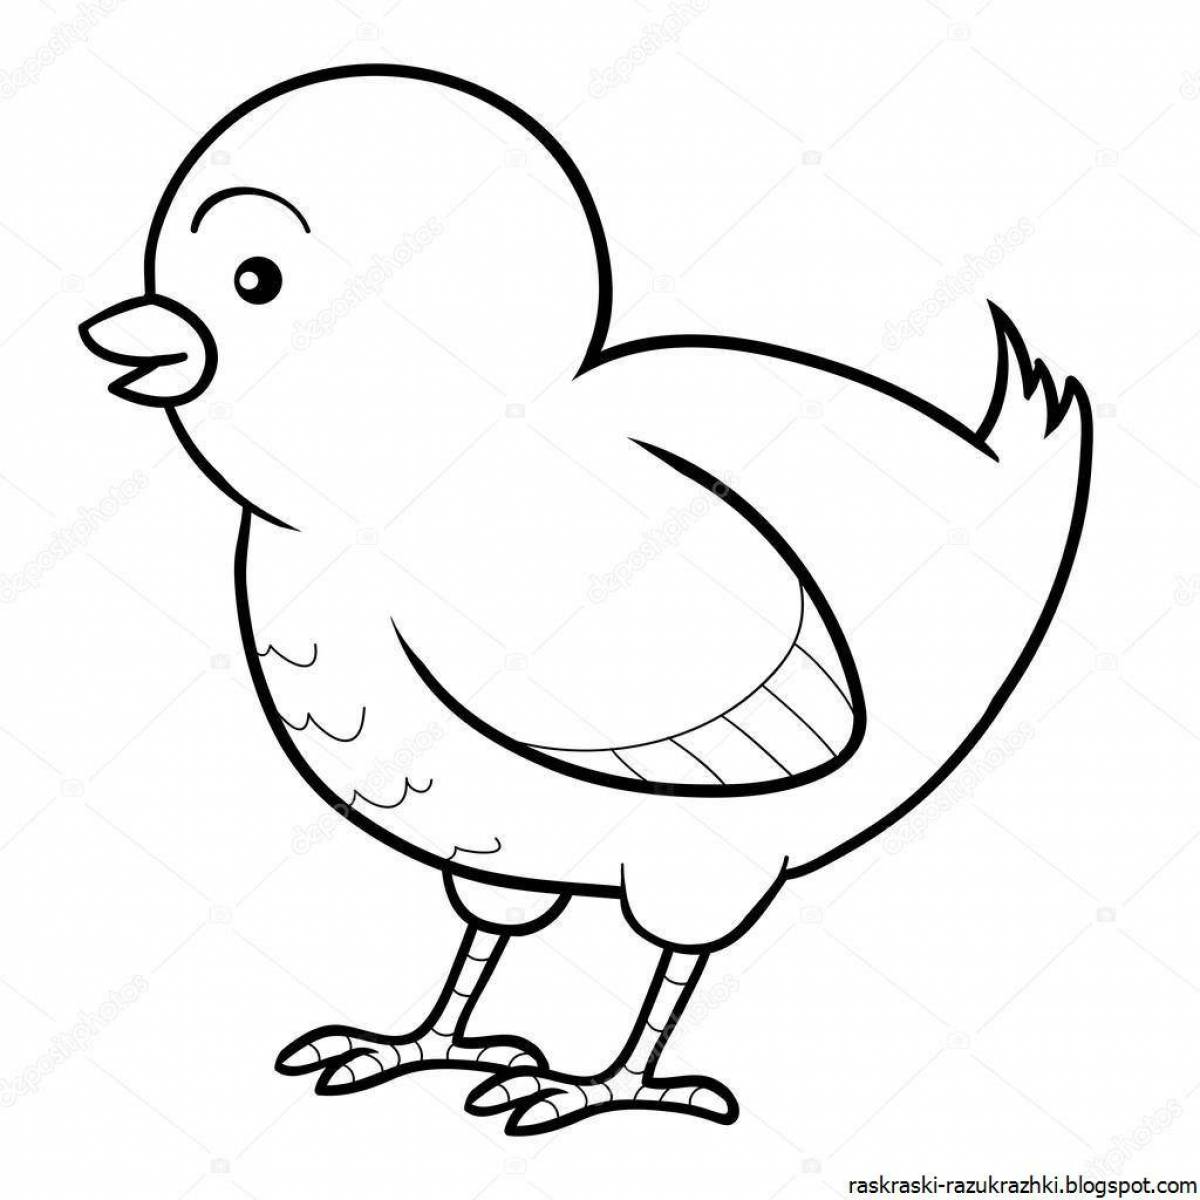 Colorful chicken coloring page for 2-3 year olds